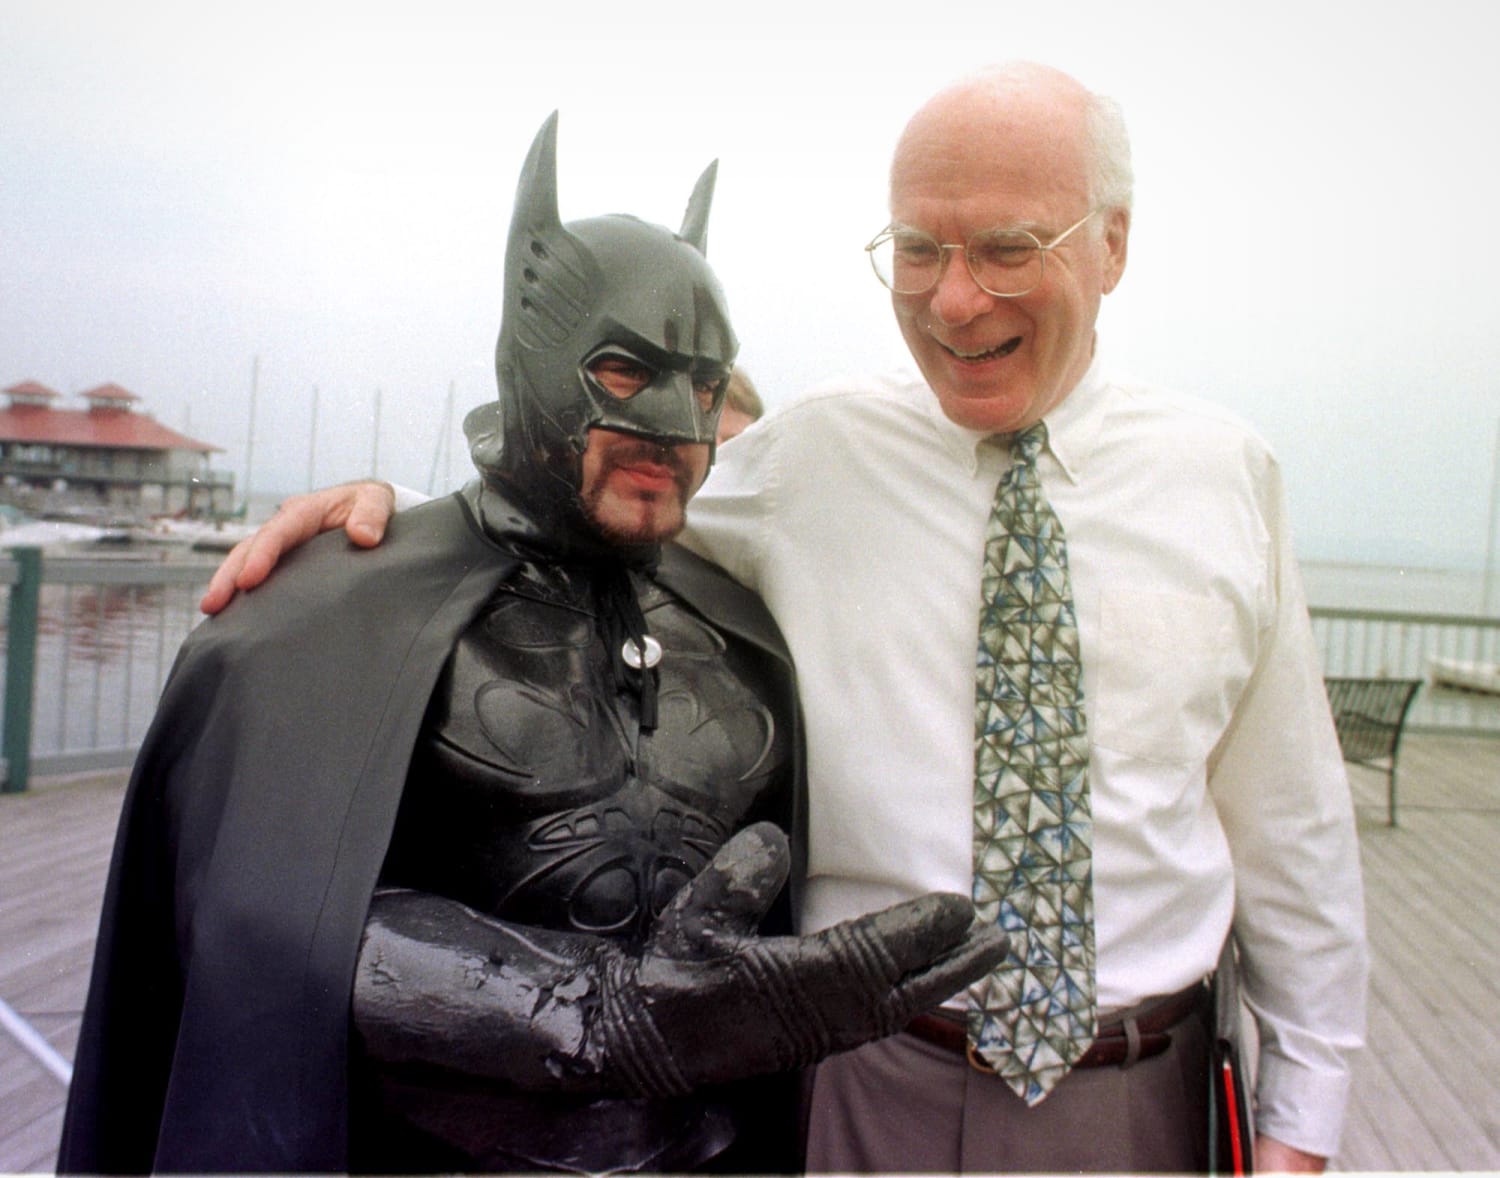 Patrick Leahy won't seek re-election. But will he do more Batman movies?